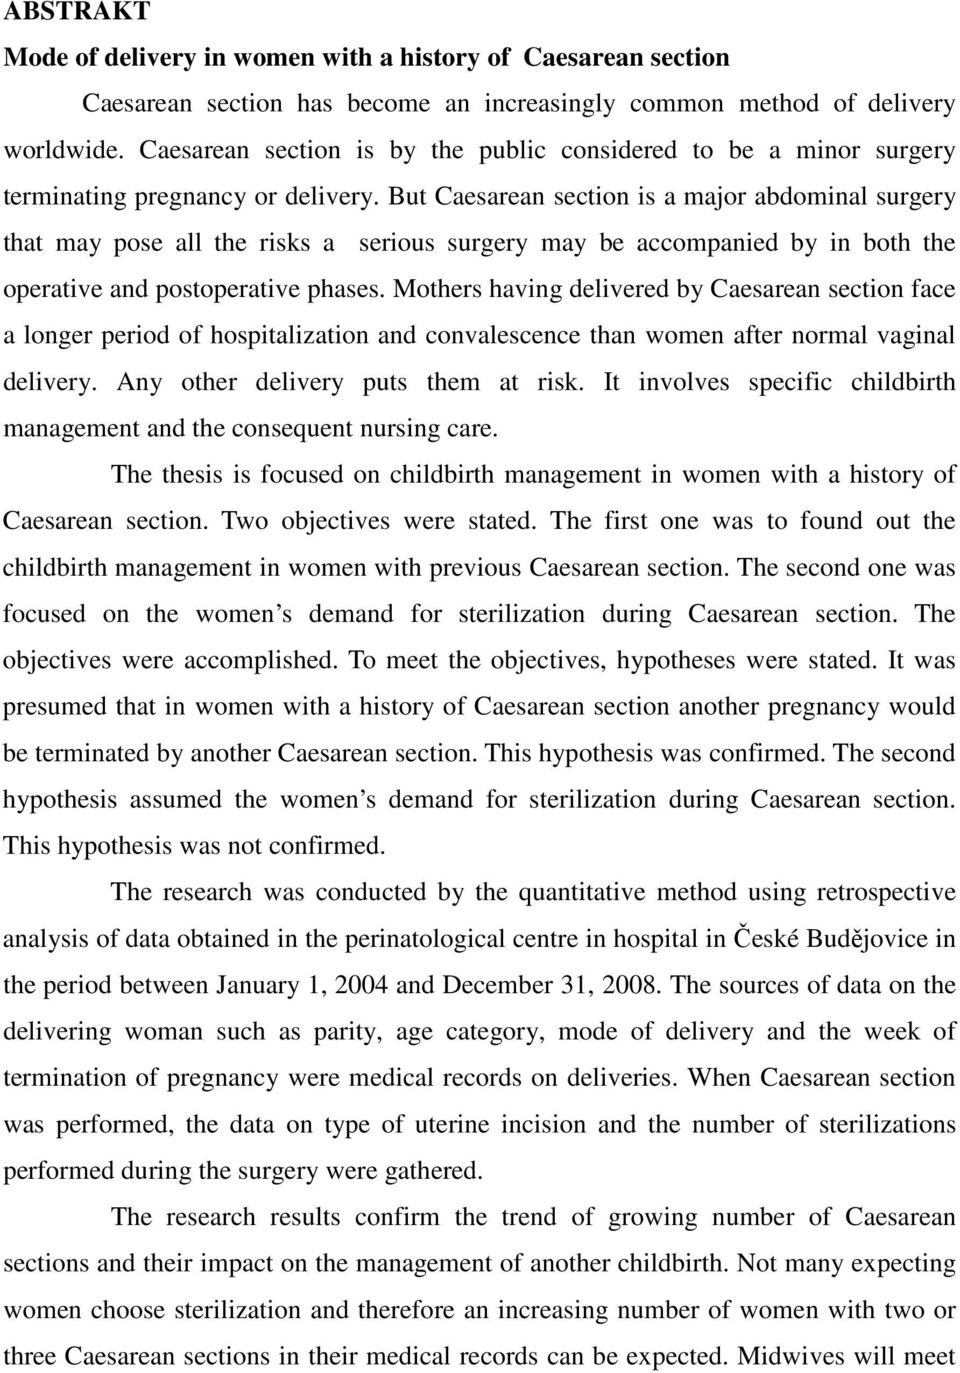 But Caesarean section is a major abdominal surgery that may pose all the risks a serious surgery may be accompanied by in both the operative and postoperative phases.